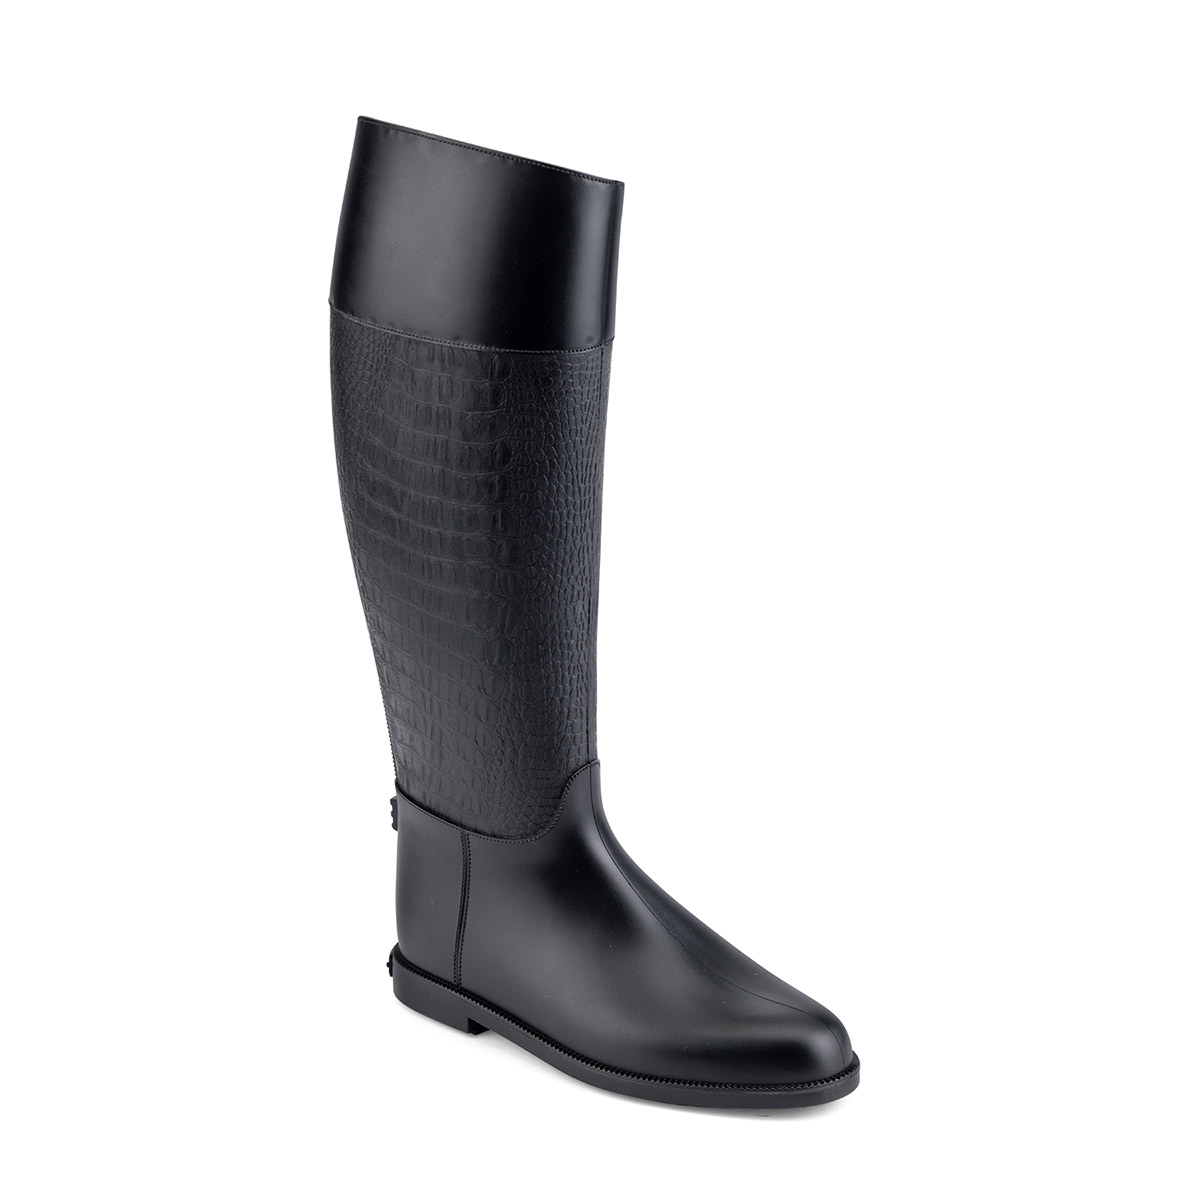 Riding boot in matt pvc with high boot leg  featured by photoengraved crocodile print 